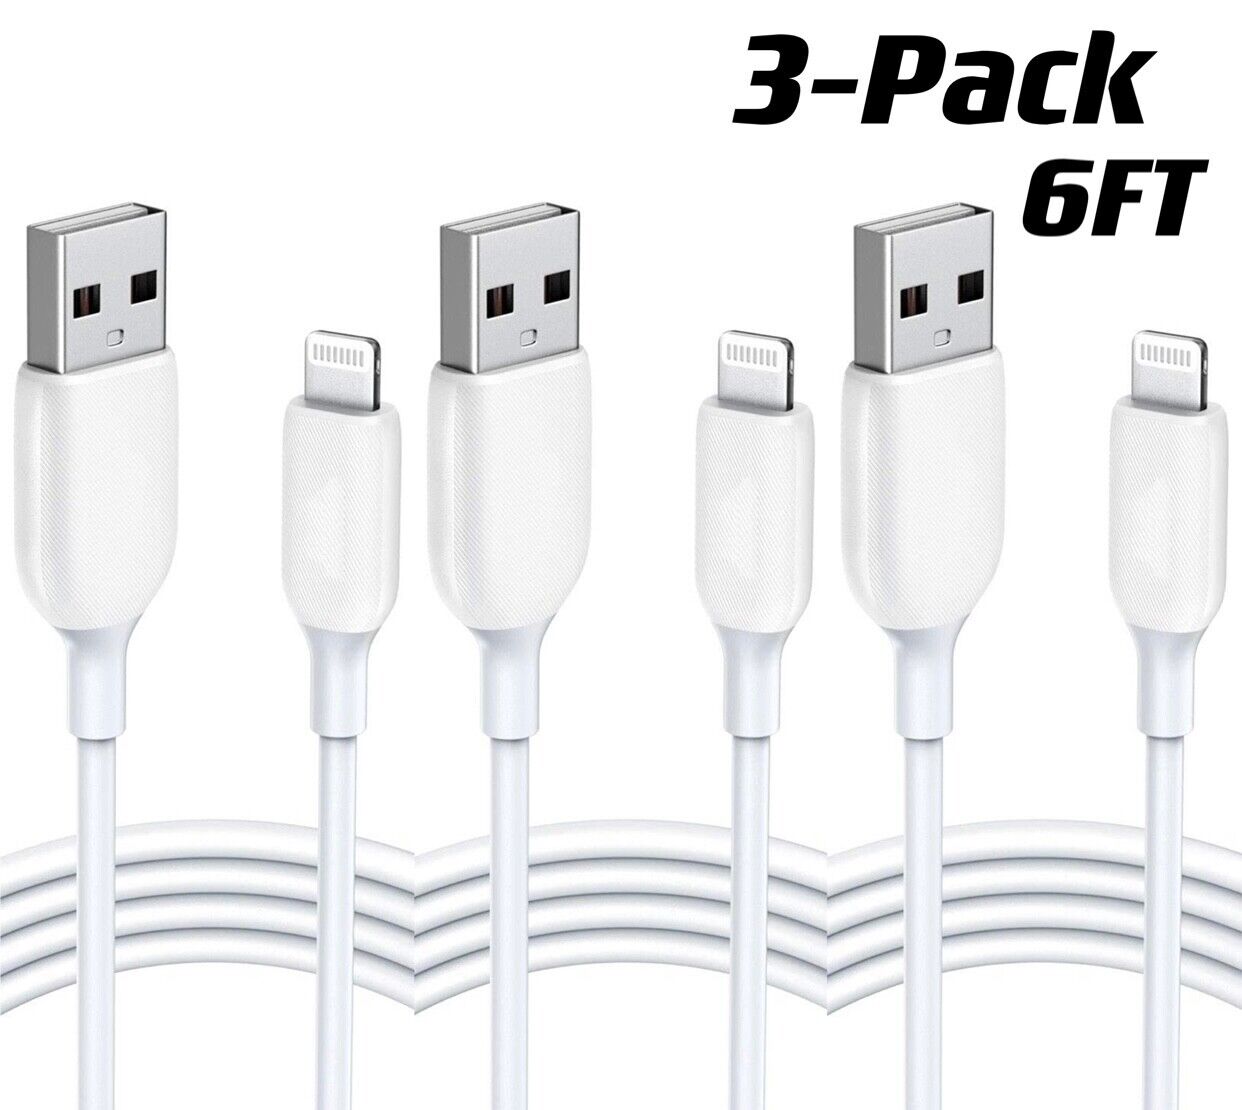 3-PACK 6FT USB Data Charger Cables Cords For Apple iPhone 5 S 6 7 8 X Plus Unbranded Does Not Apply